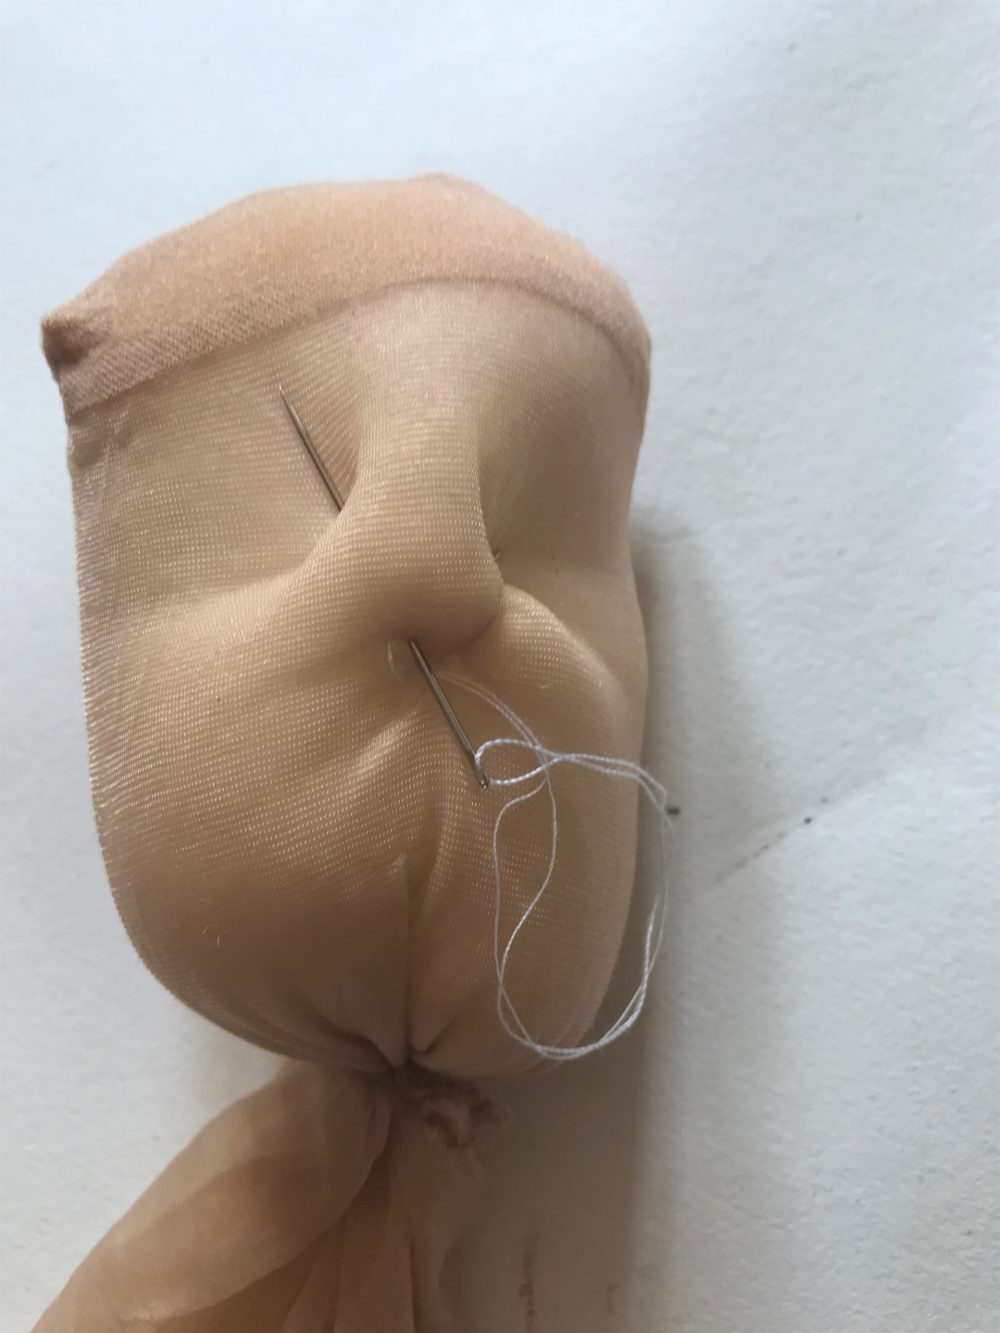 stitching the form of the nose